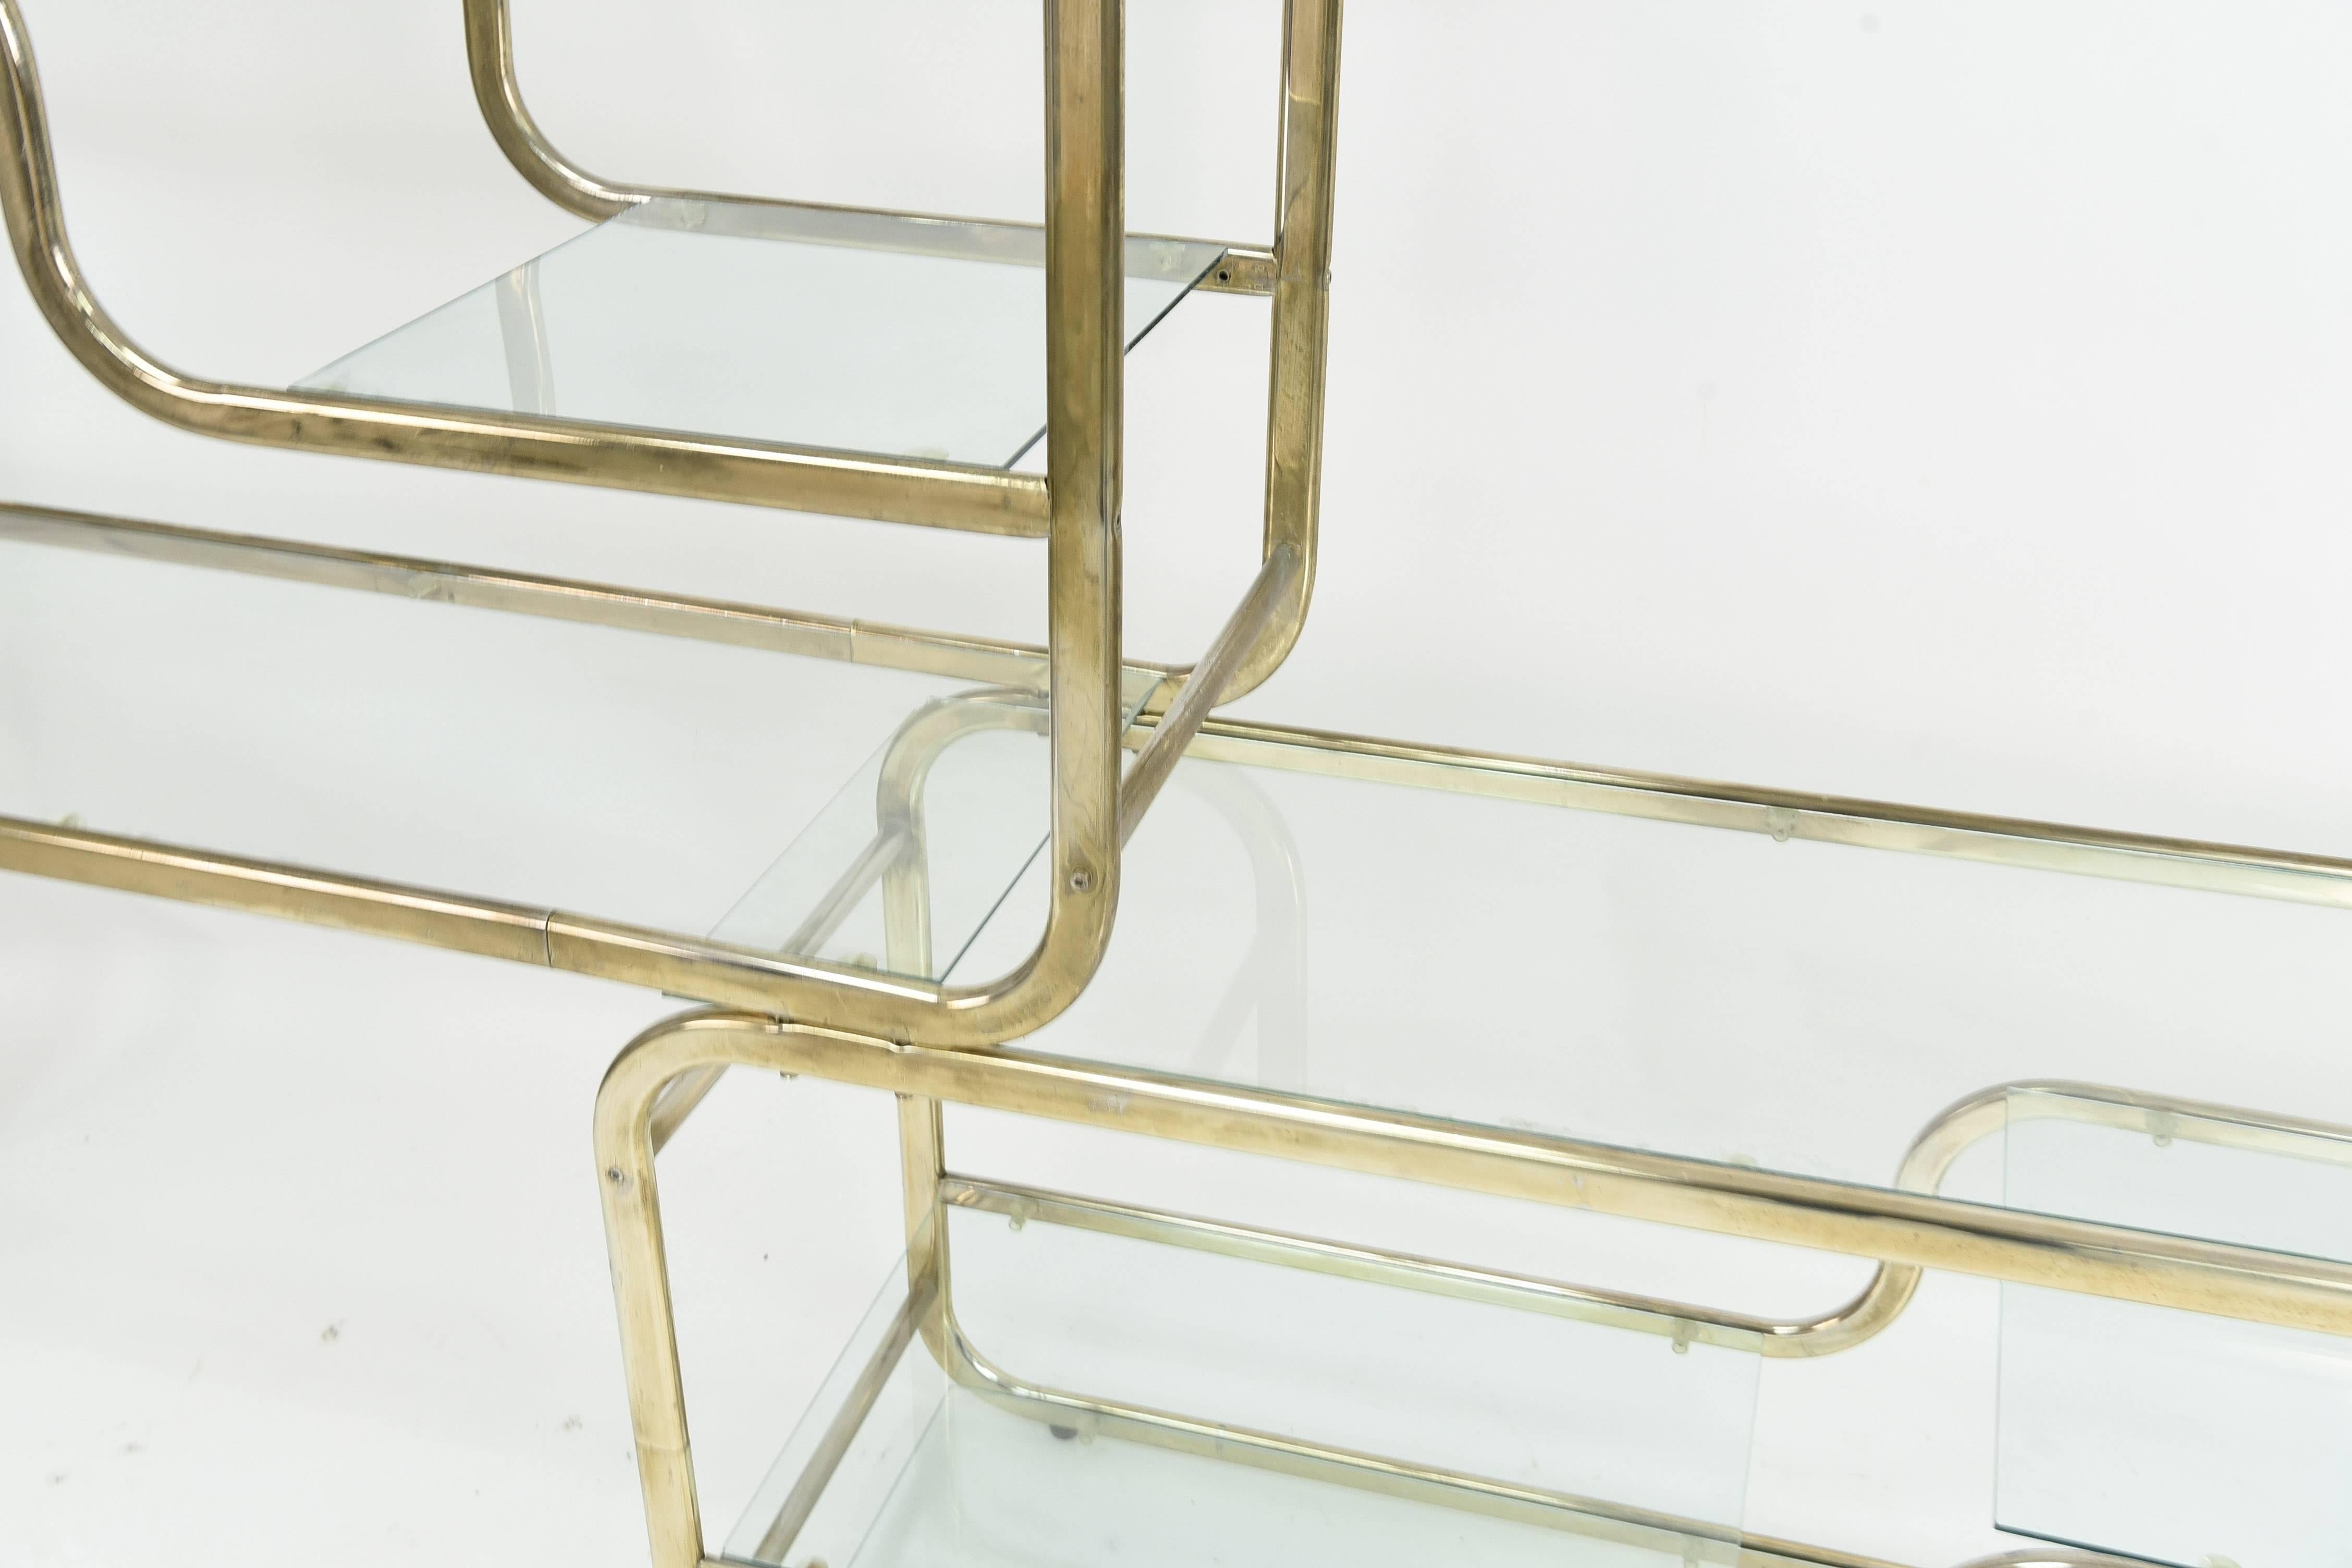 This modular, cantilever brass and glass étagère is in the manner of sought after midcentury designer Milo Baughman. This piece resembles Baughman's étagère design for D.I.A. and is of a creative, sculptural form. The underside piece can be moved to